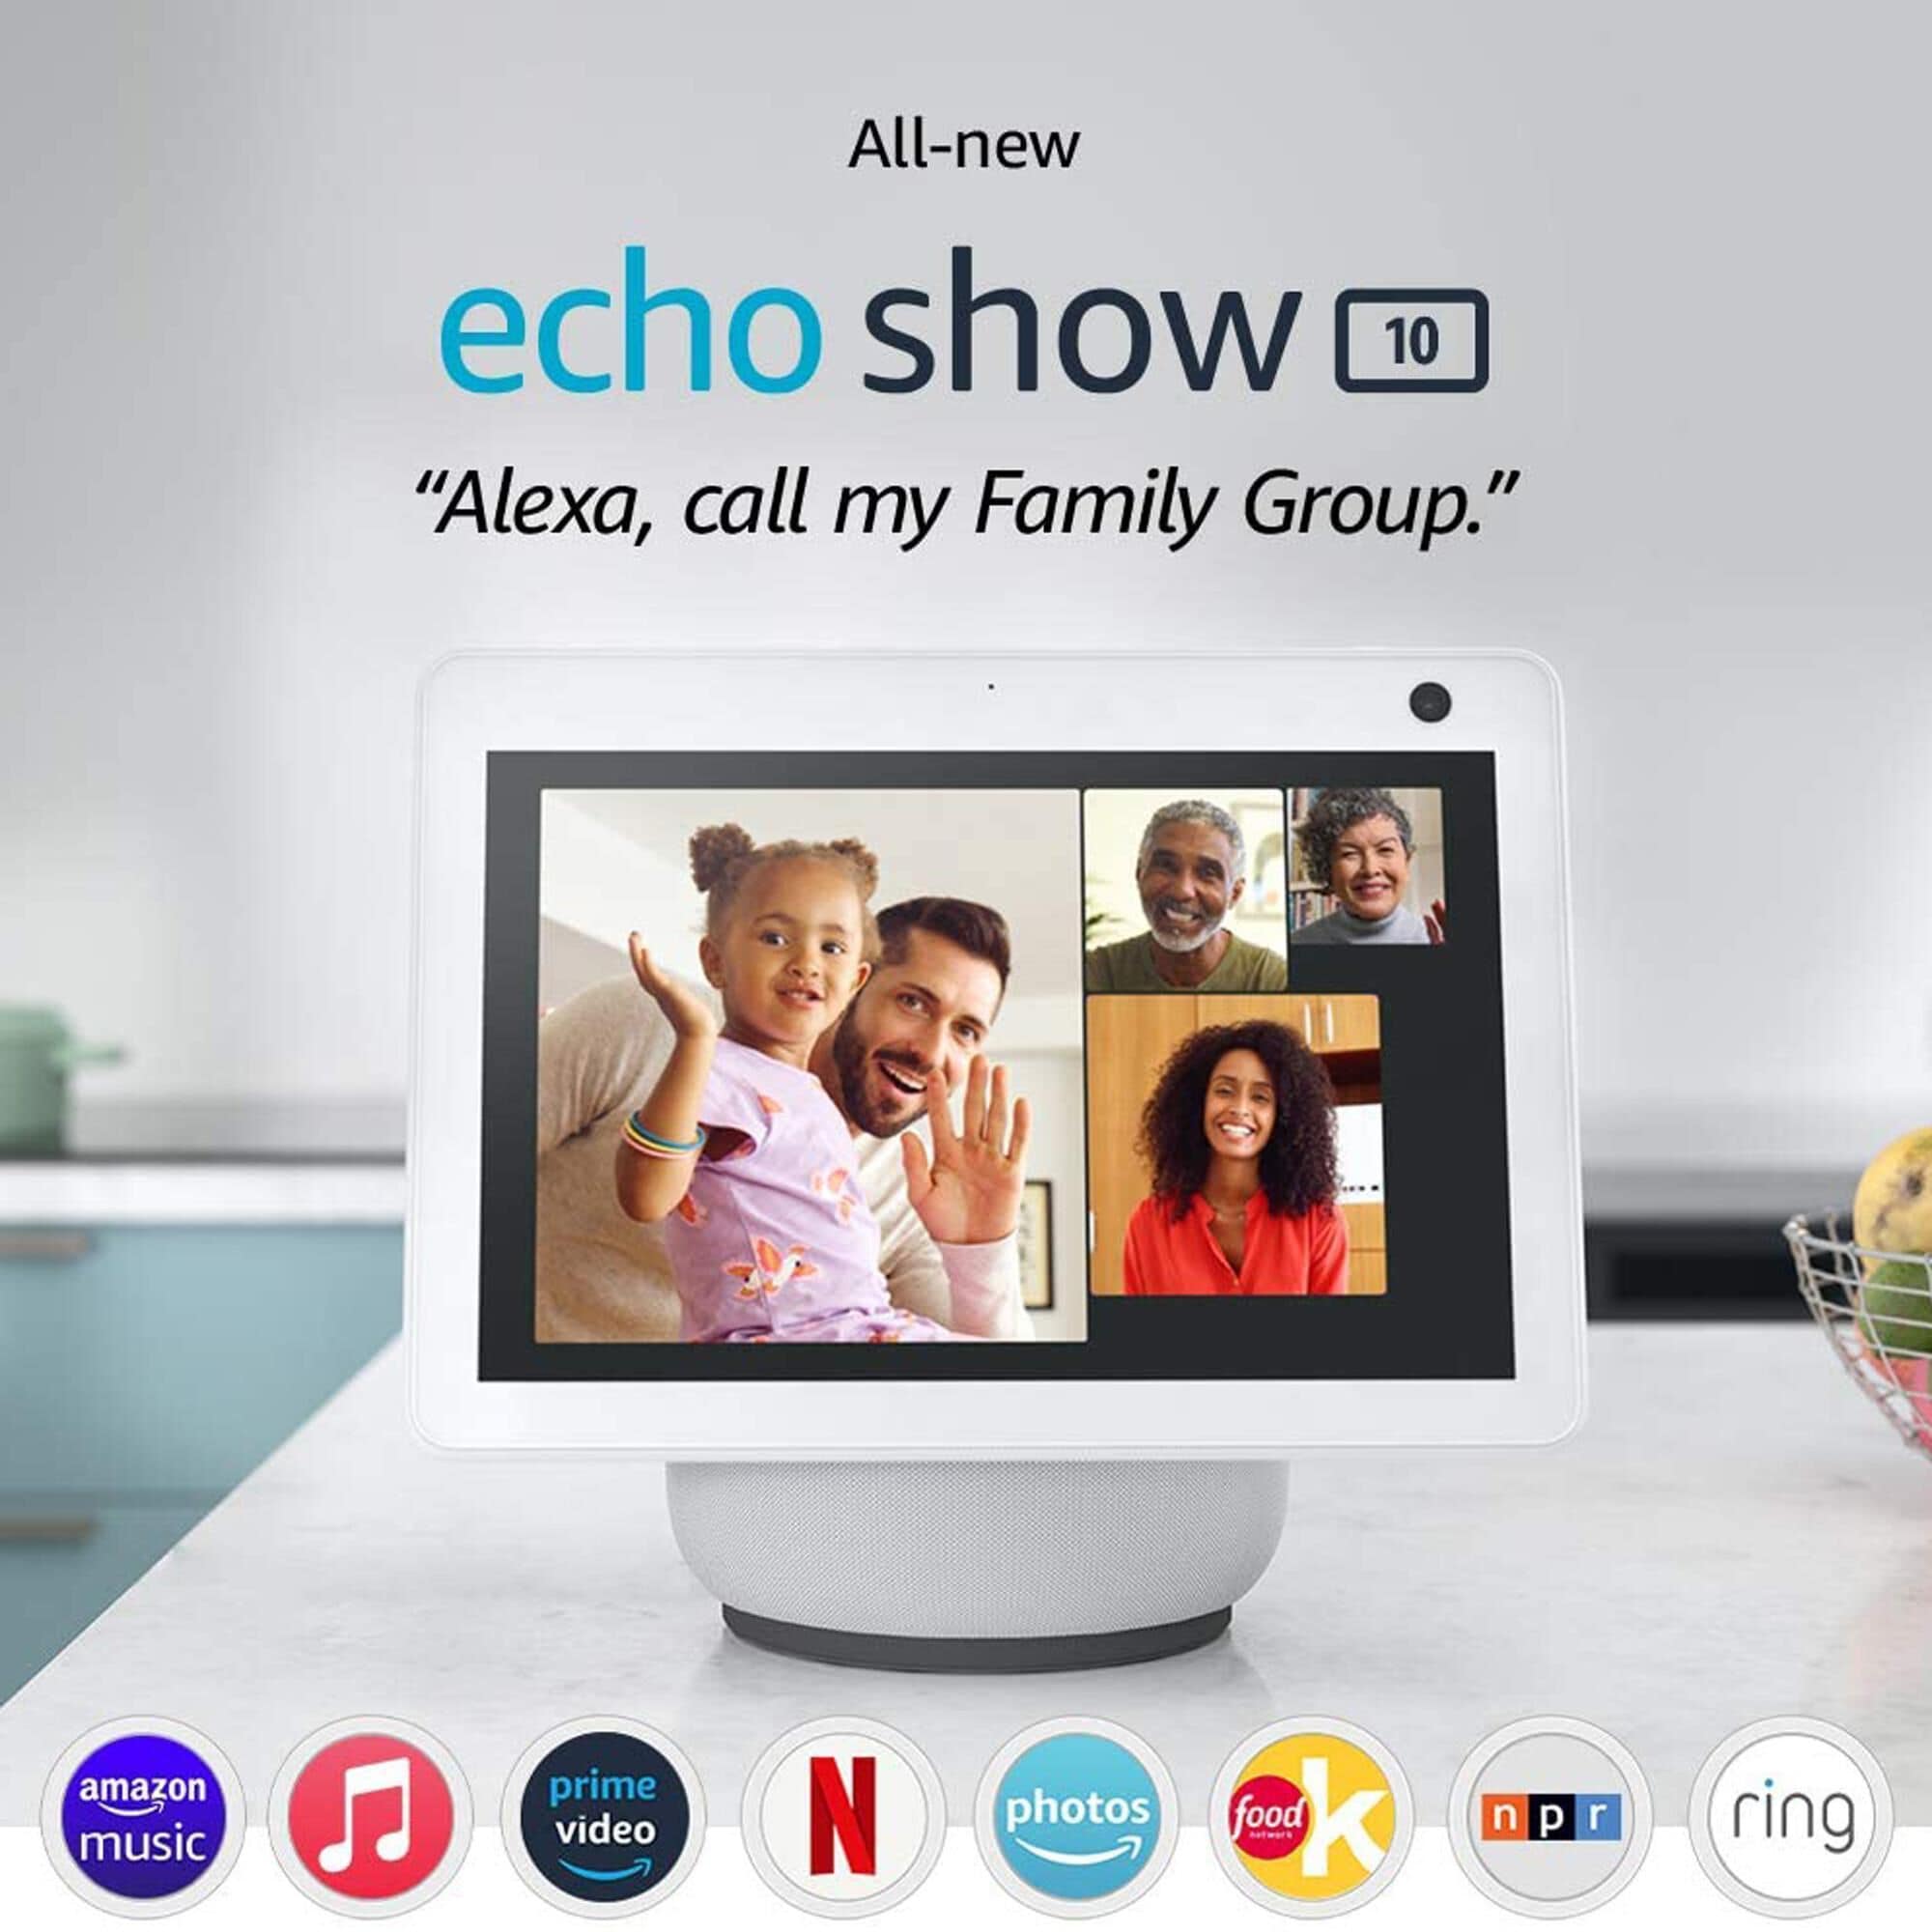 Amazon 2 Echo Show 10 HD Smart Displays with Motion and Alexa